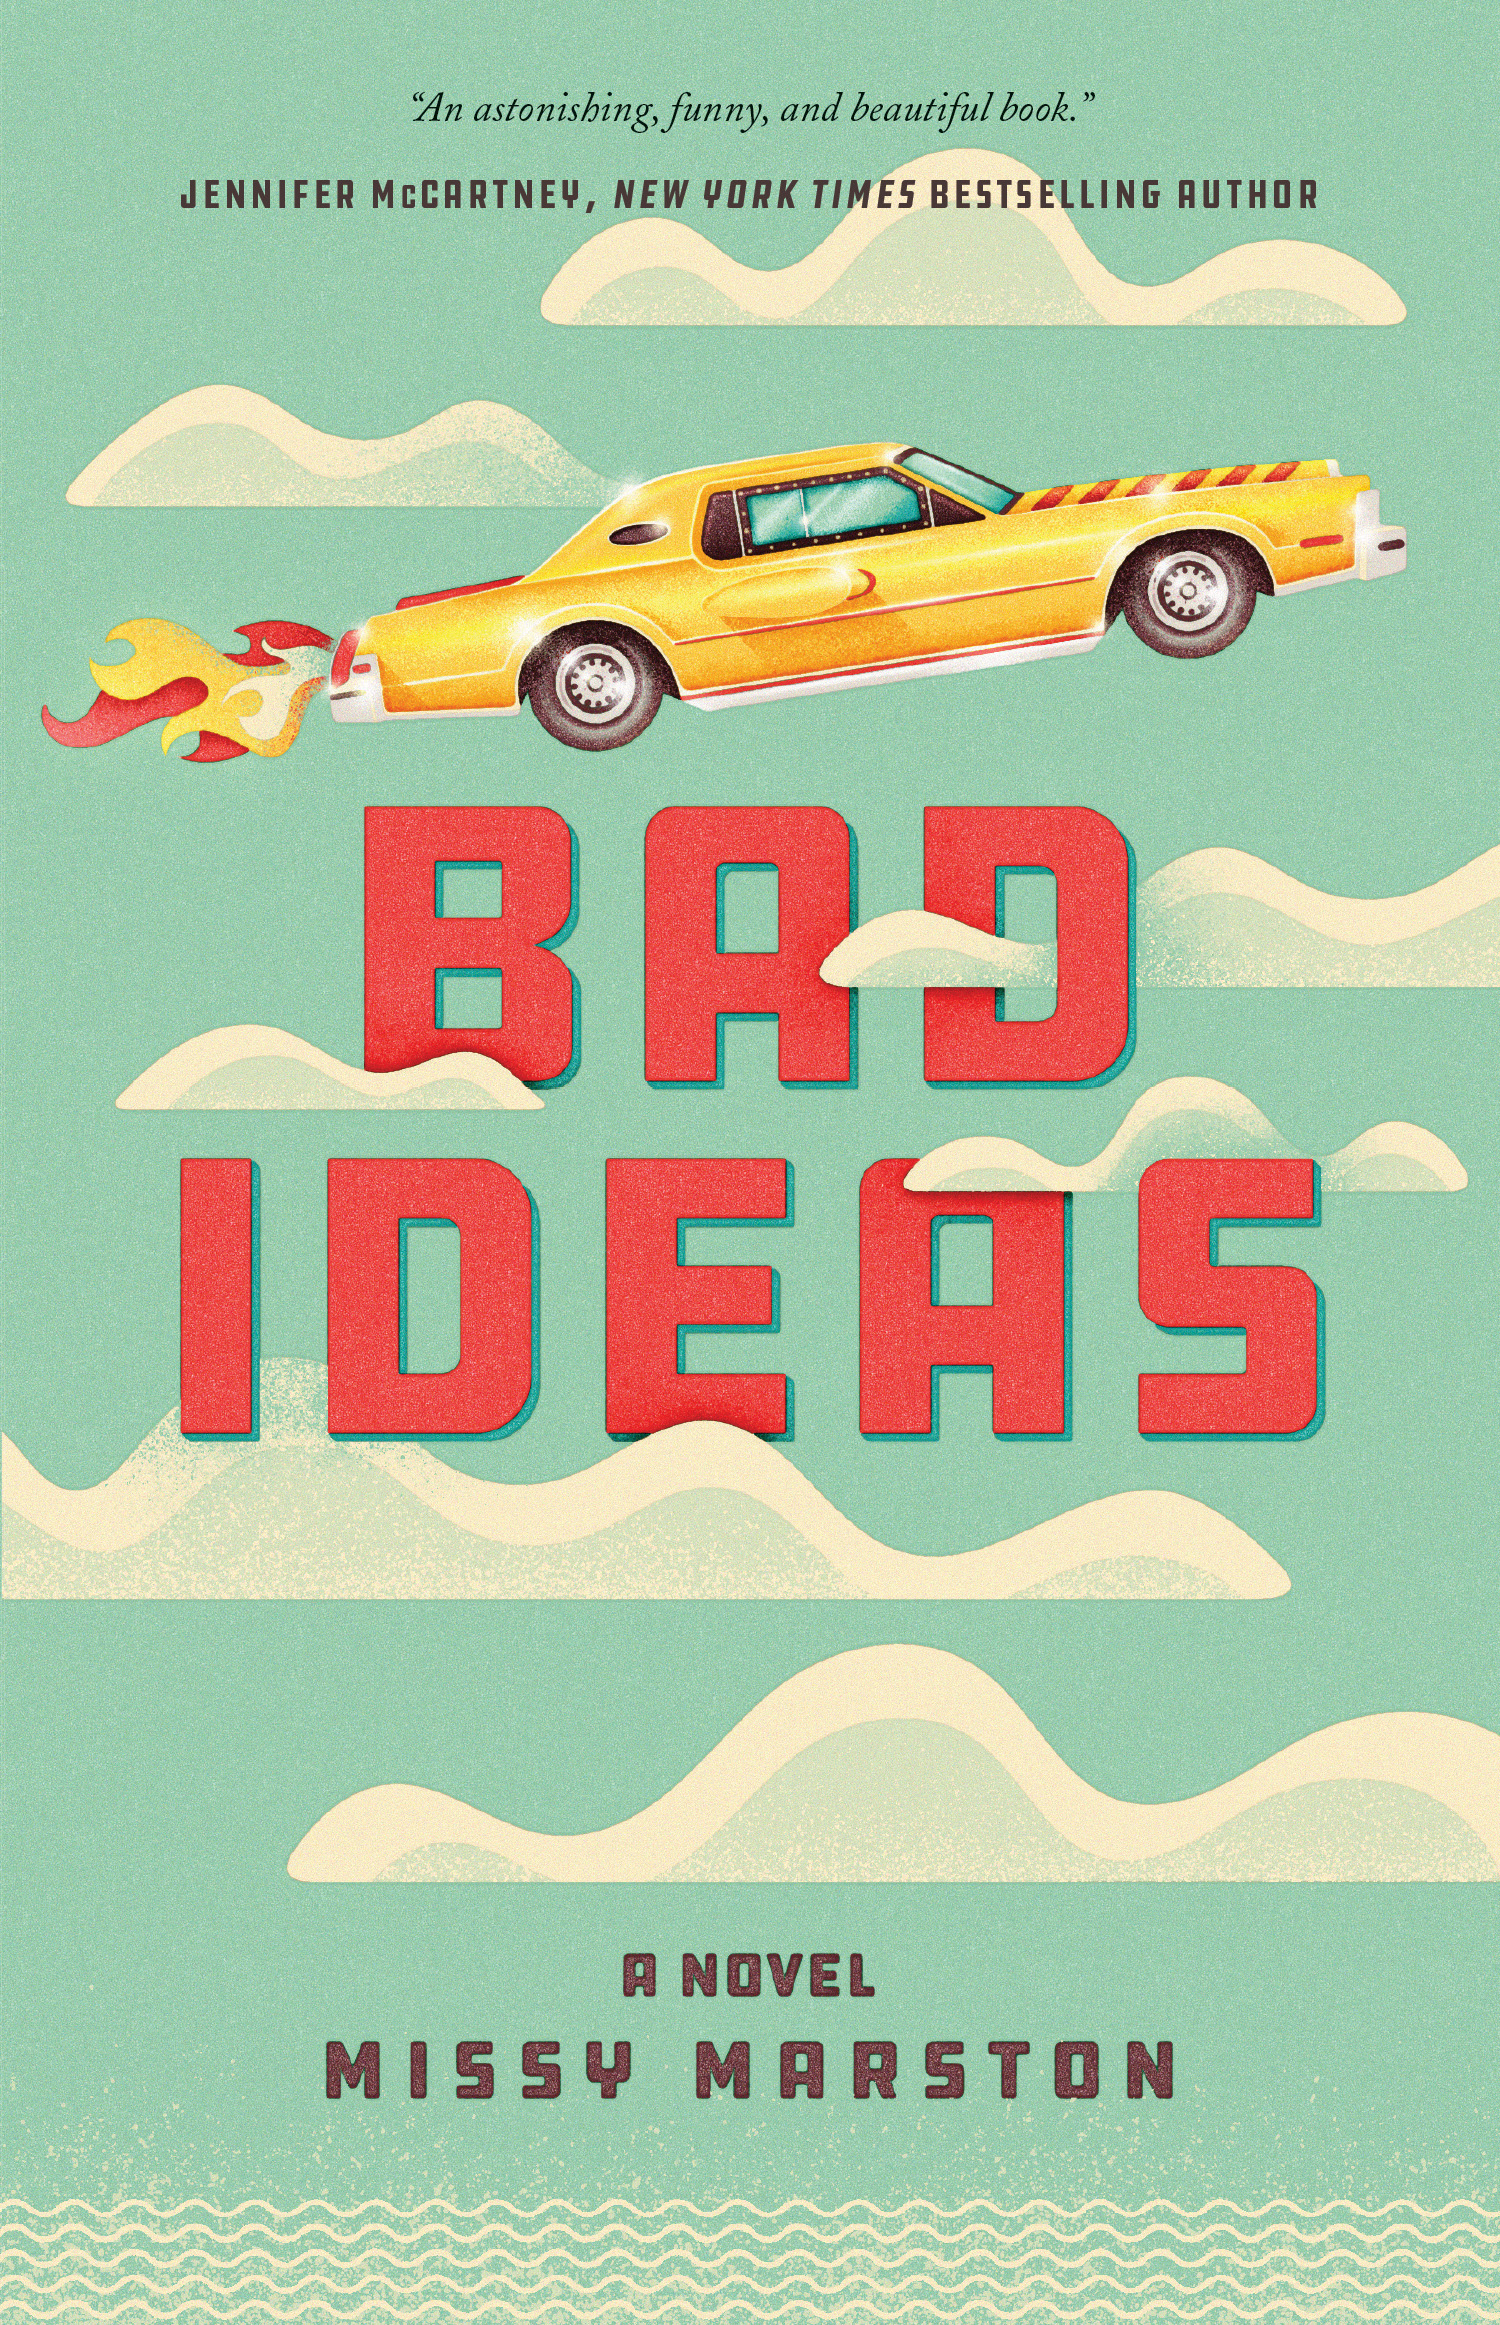 Bad ideas cover image